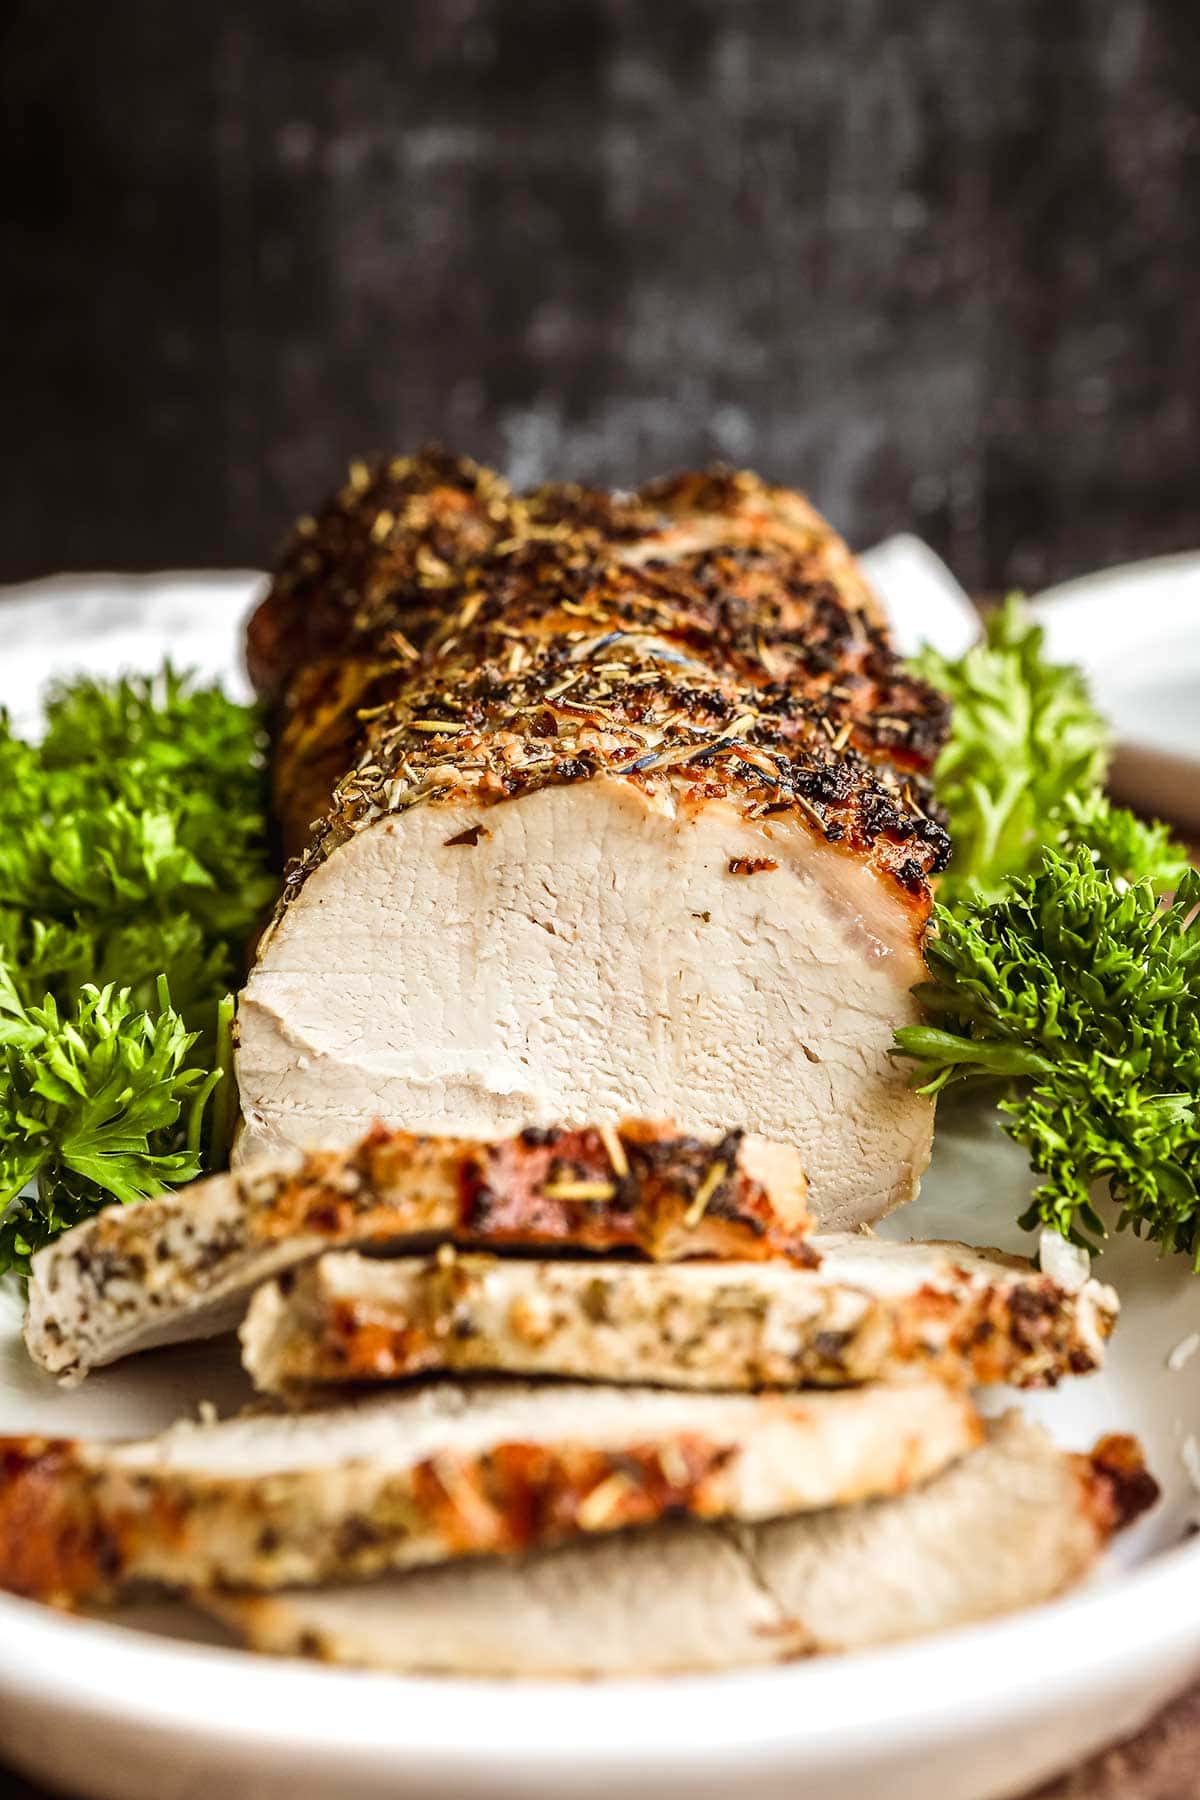 Herb Crusted Pork Loin sliced on platter with parsley garnish